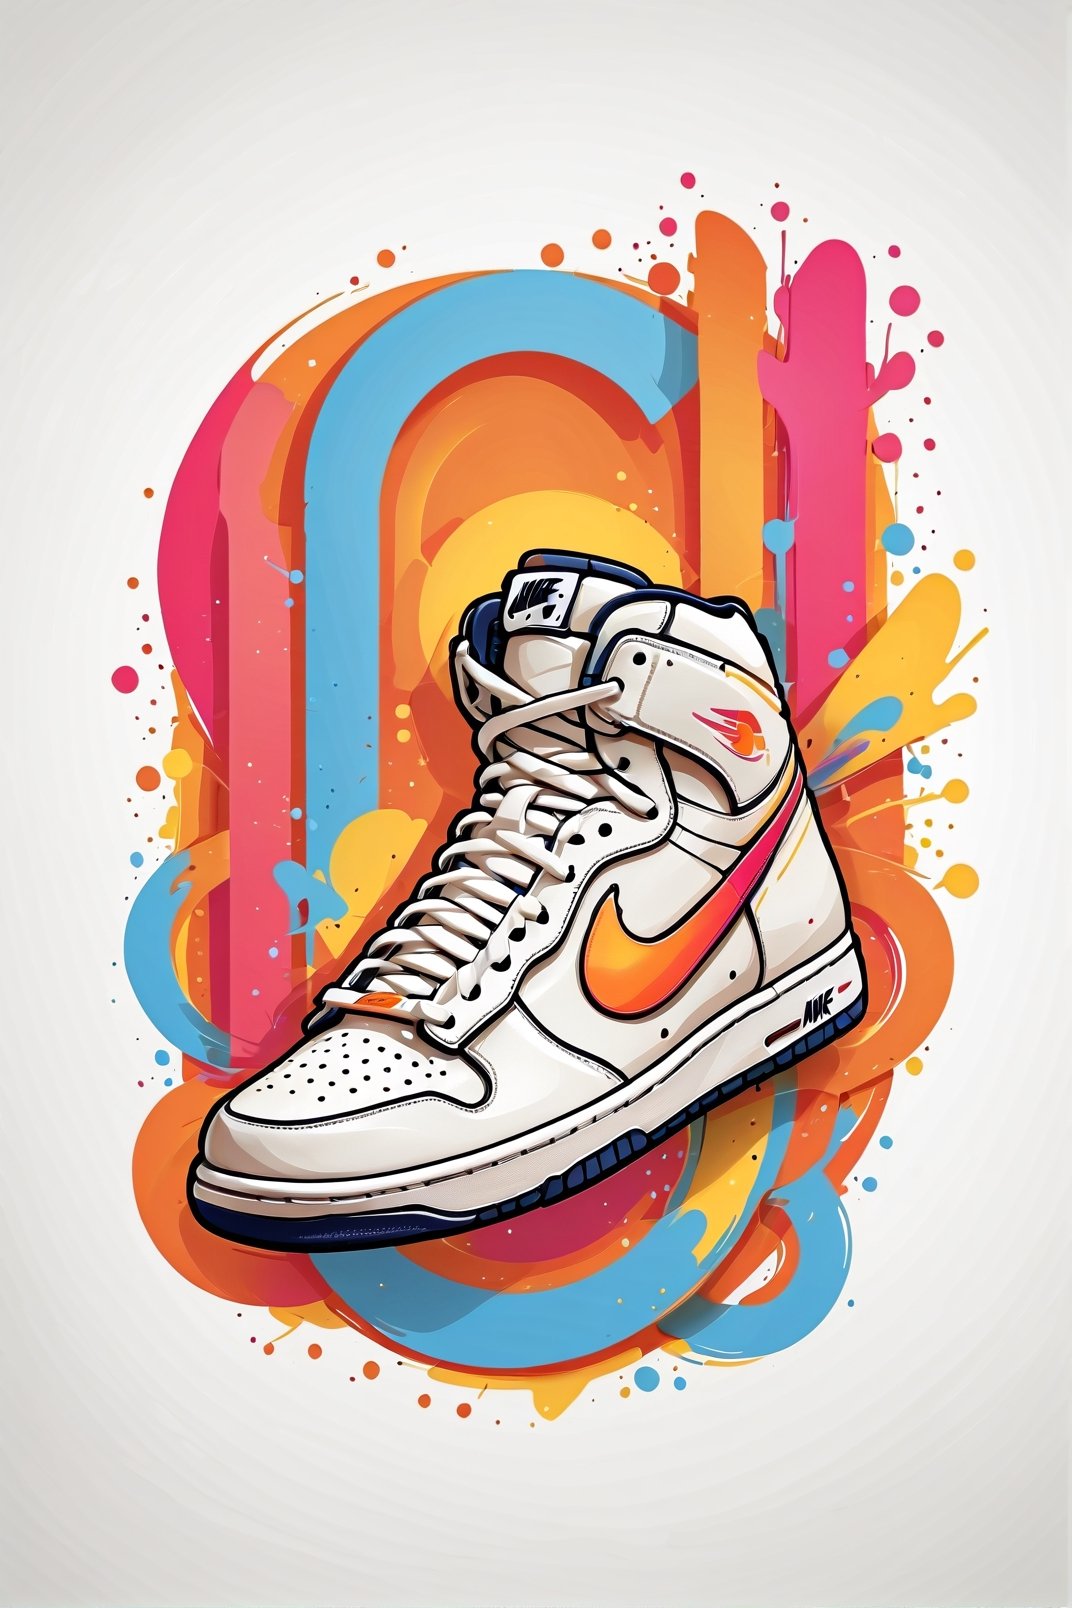 Logo business white clean background , nike sneakers , pro vector, high detail, t-shirt design, grafitti, vibrant, t-shirt less, best quality, wallpaper art, UHD, centered image, MSchiffer art, ((flat colors)), (cel-shading style) very bold neon colors, ((high saturation)) ink lines, clean white background environment

